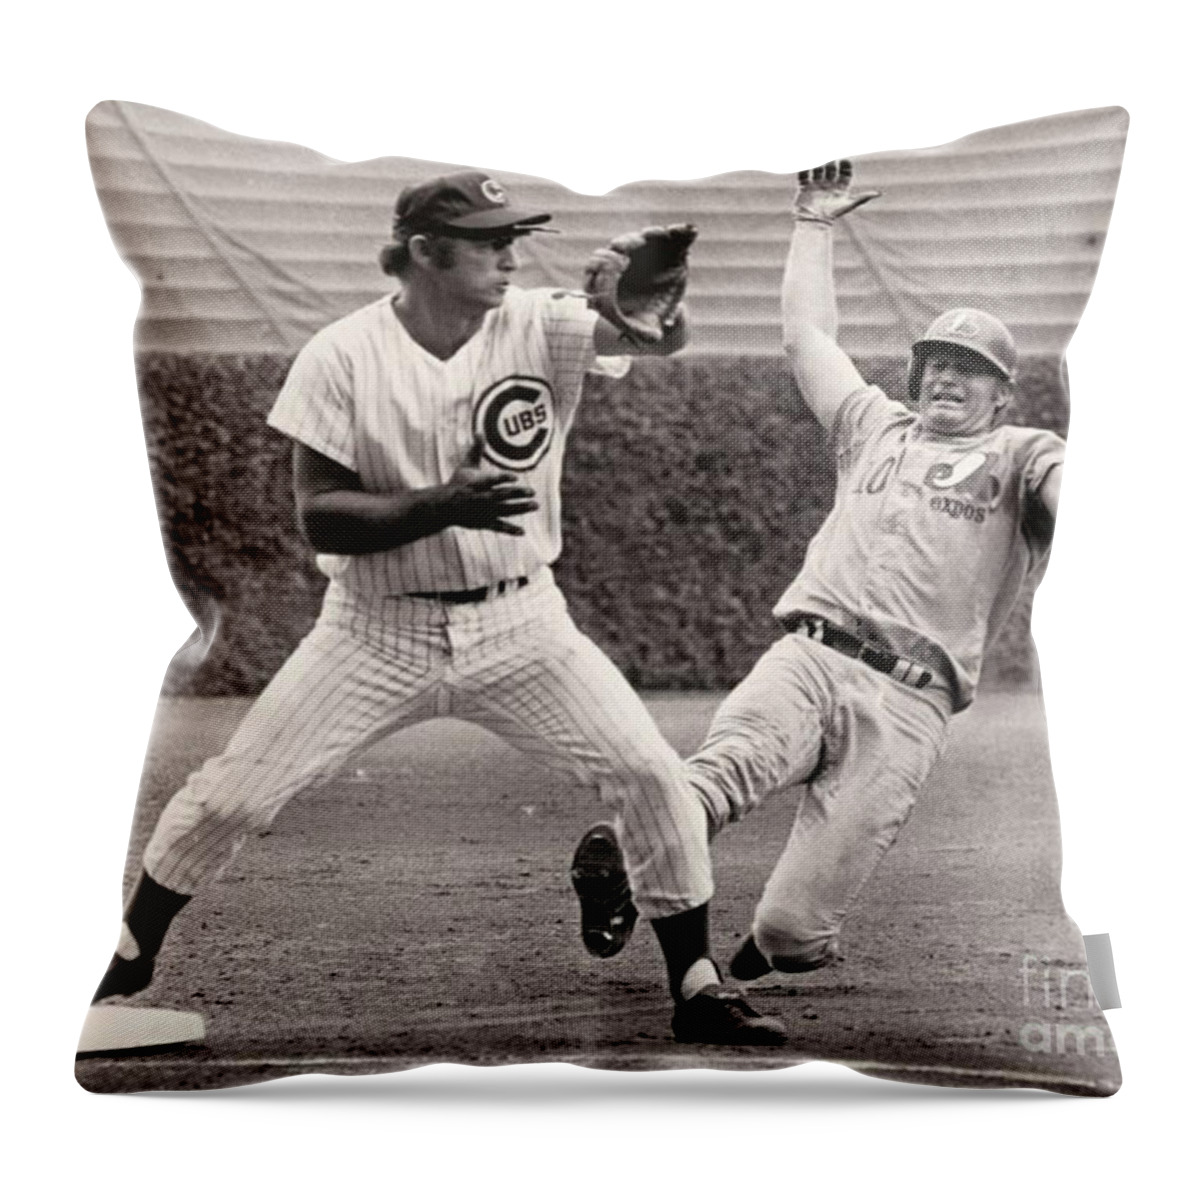 Ron Throw Pillow featuring the photograph Ron Santo #1 by Action